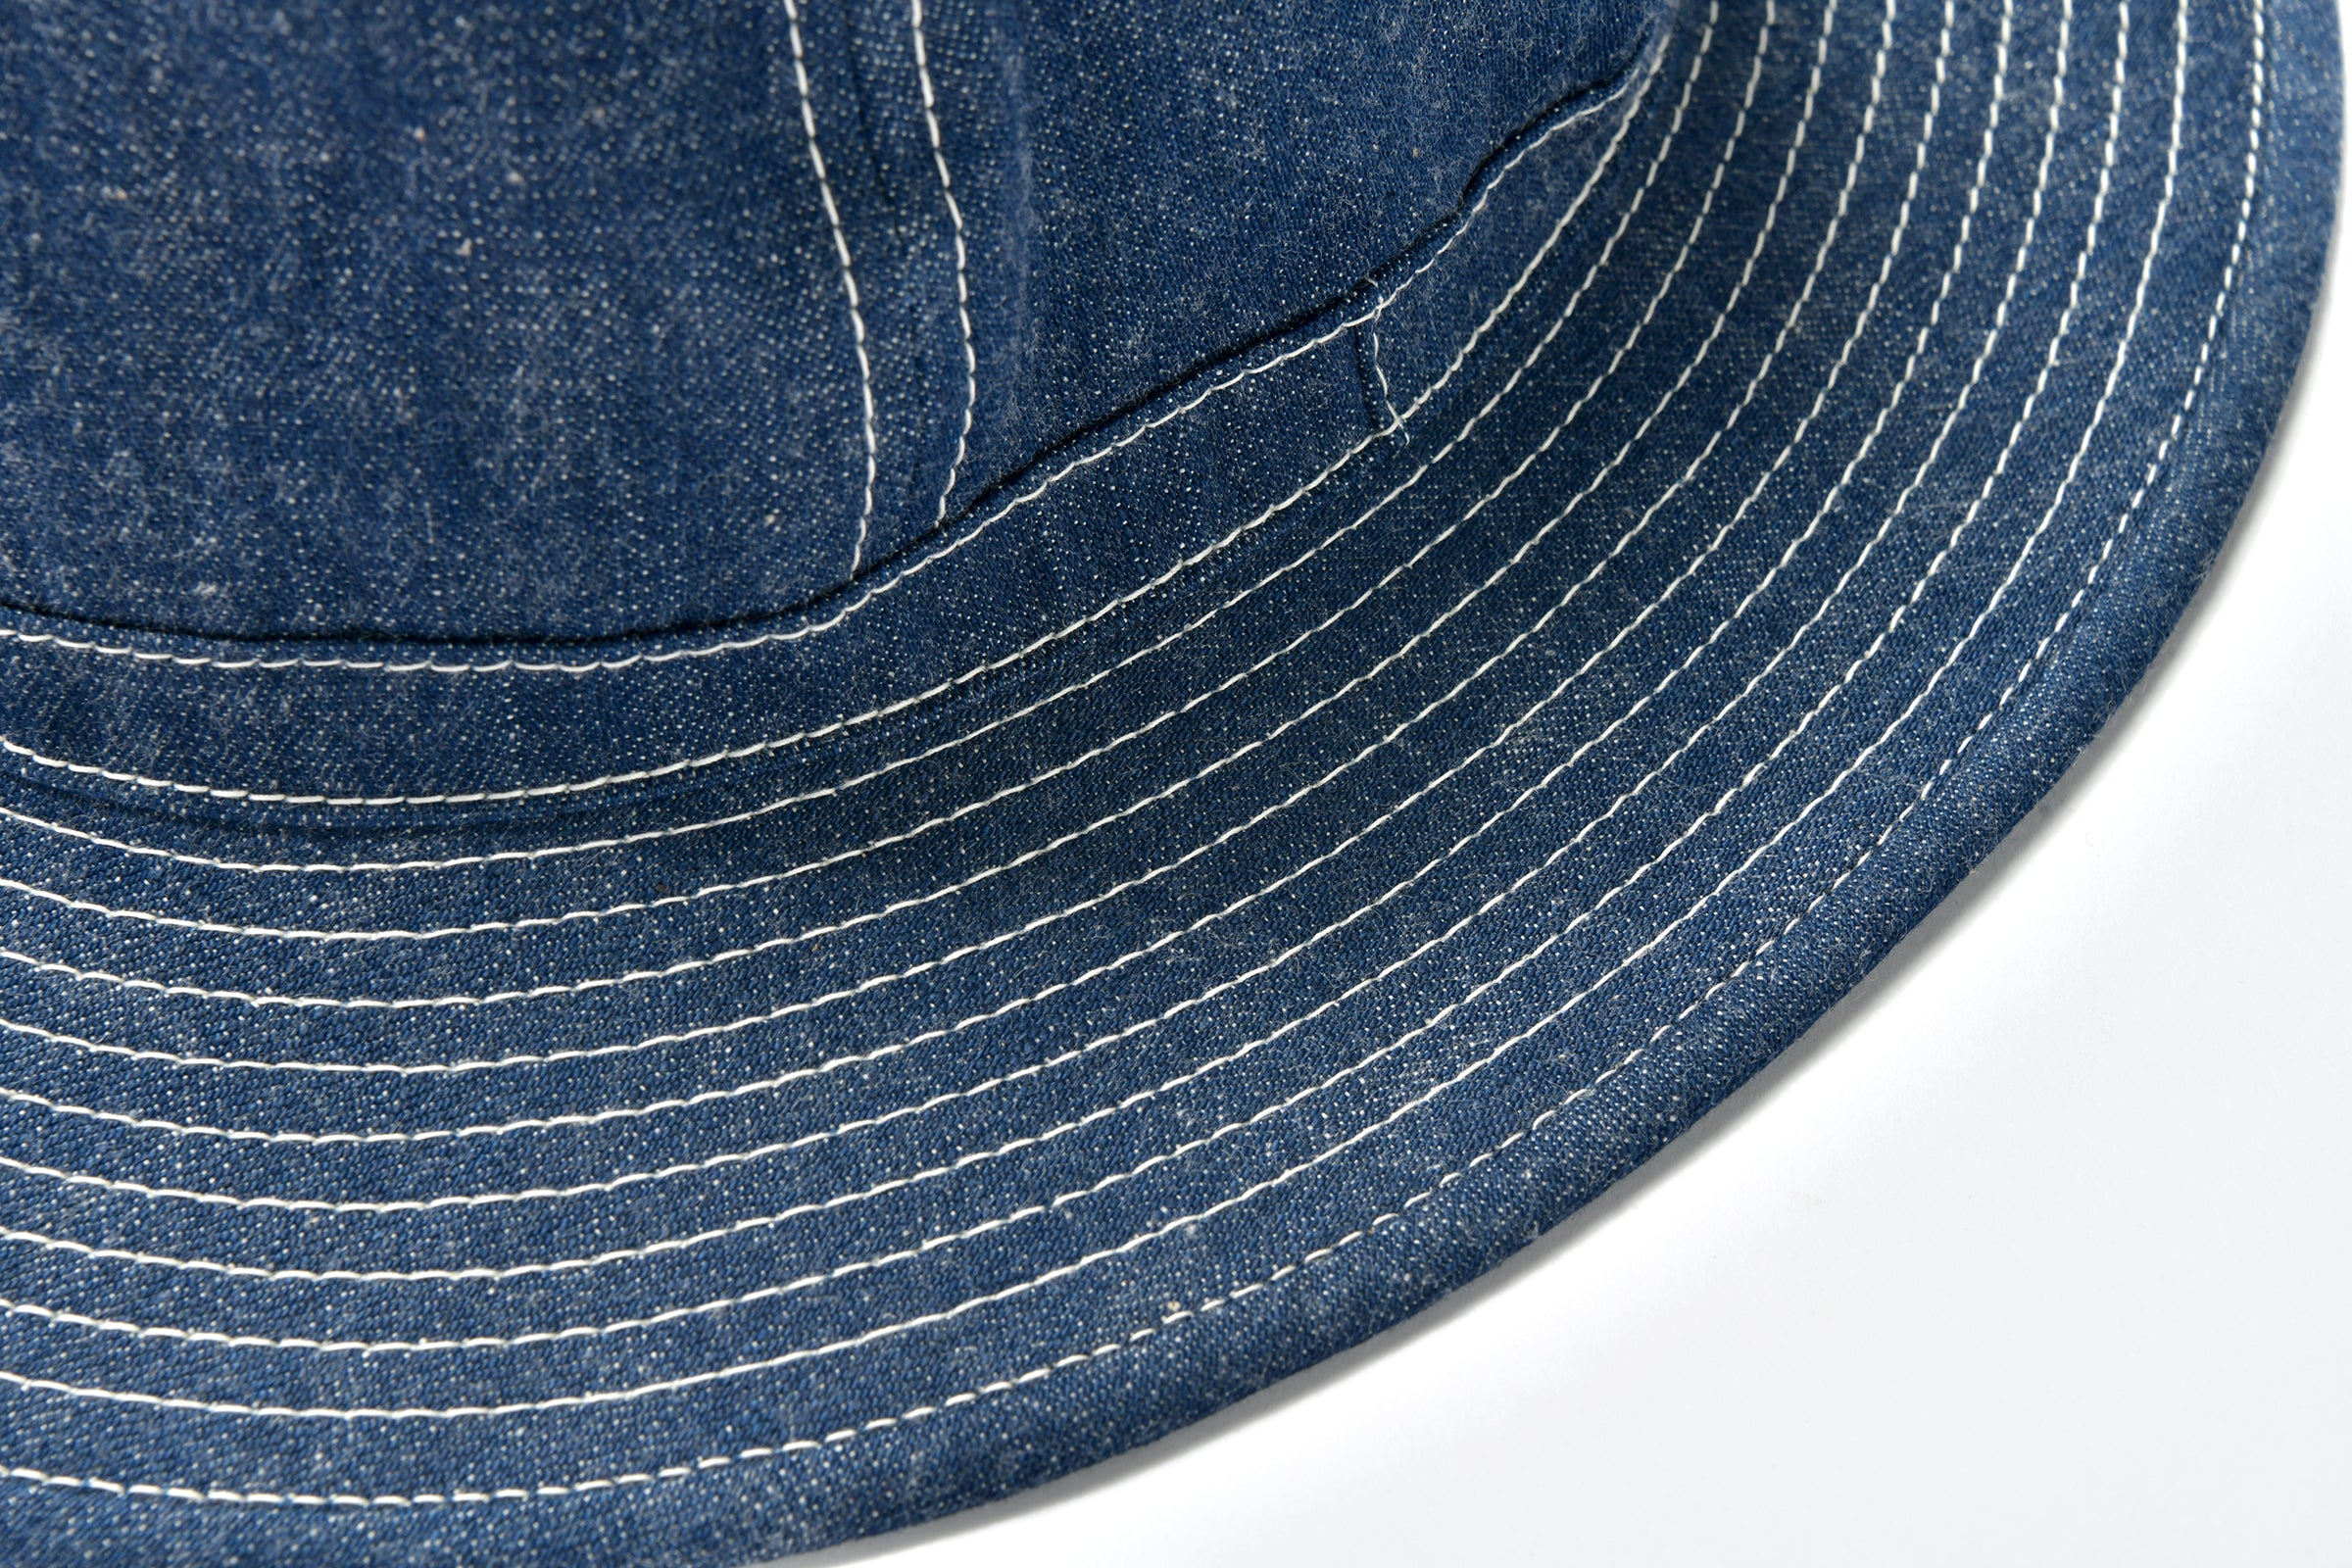 HAT, WORKING, DENIM, BLUE – The Real McCoy's